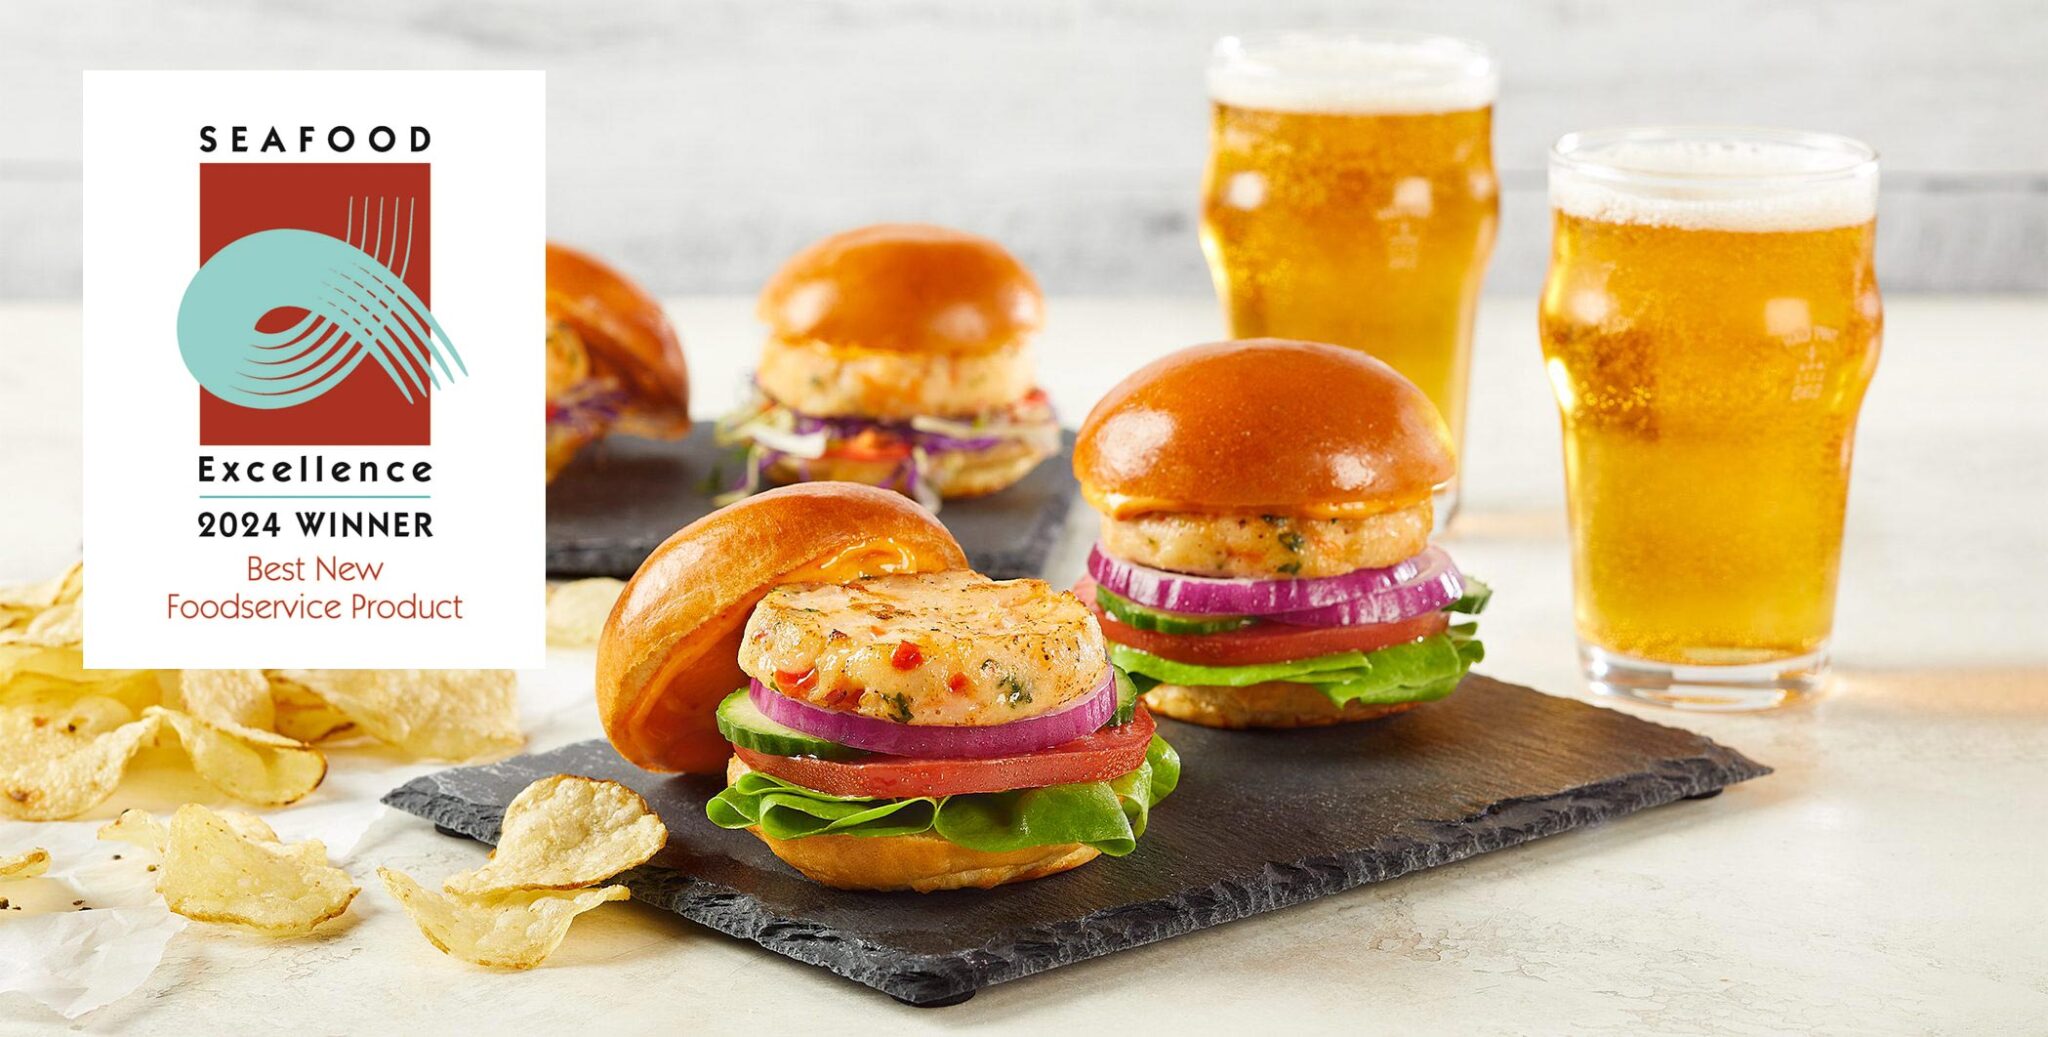 2024 Seafood Excellence Award Winner logo superimposed over image of Social Kitchens Pro Premium Shrimp Sliders on a slate slab served with scattered potato chips and glasses of beer.